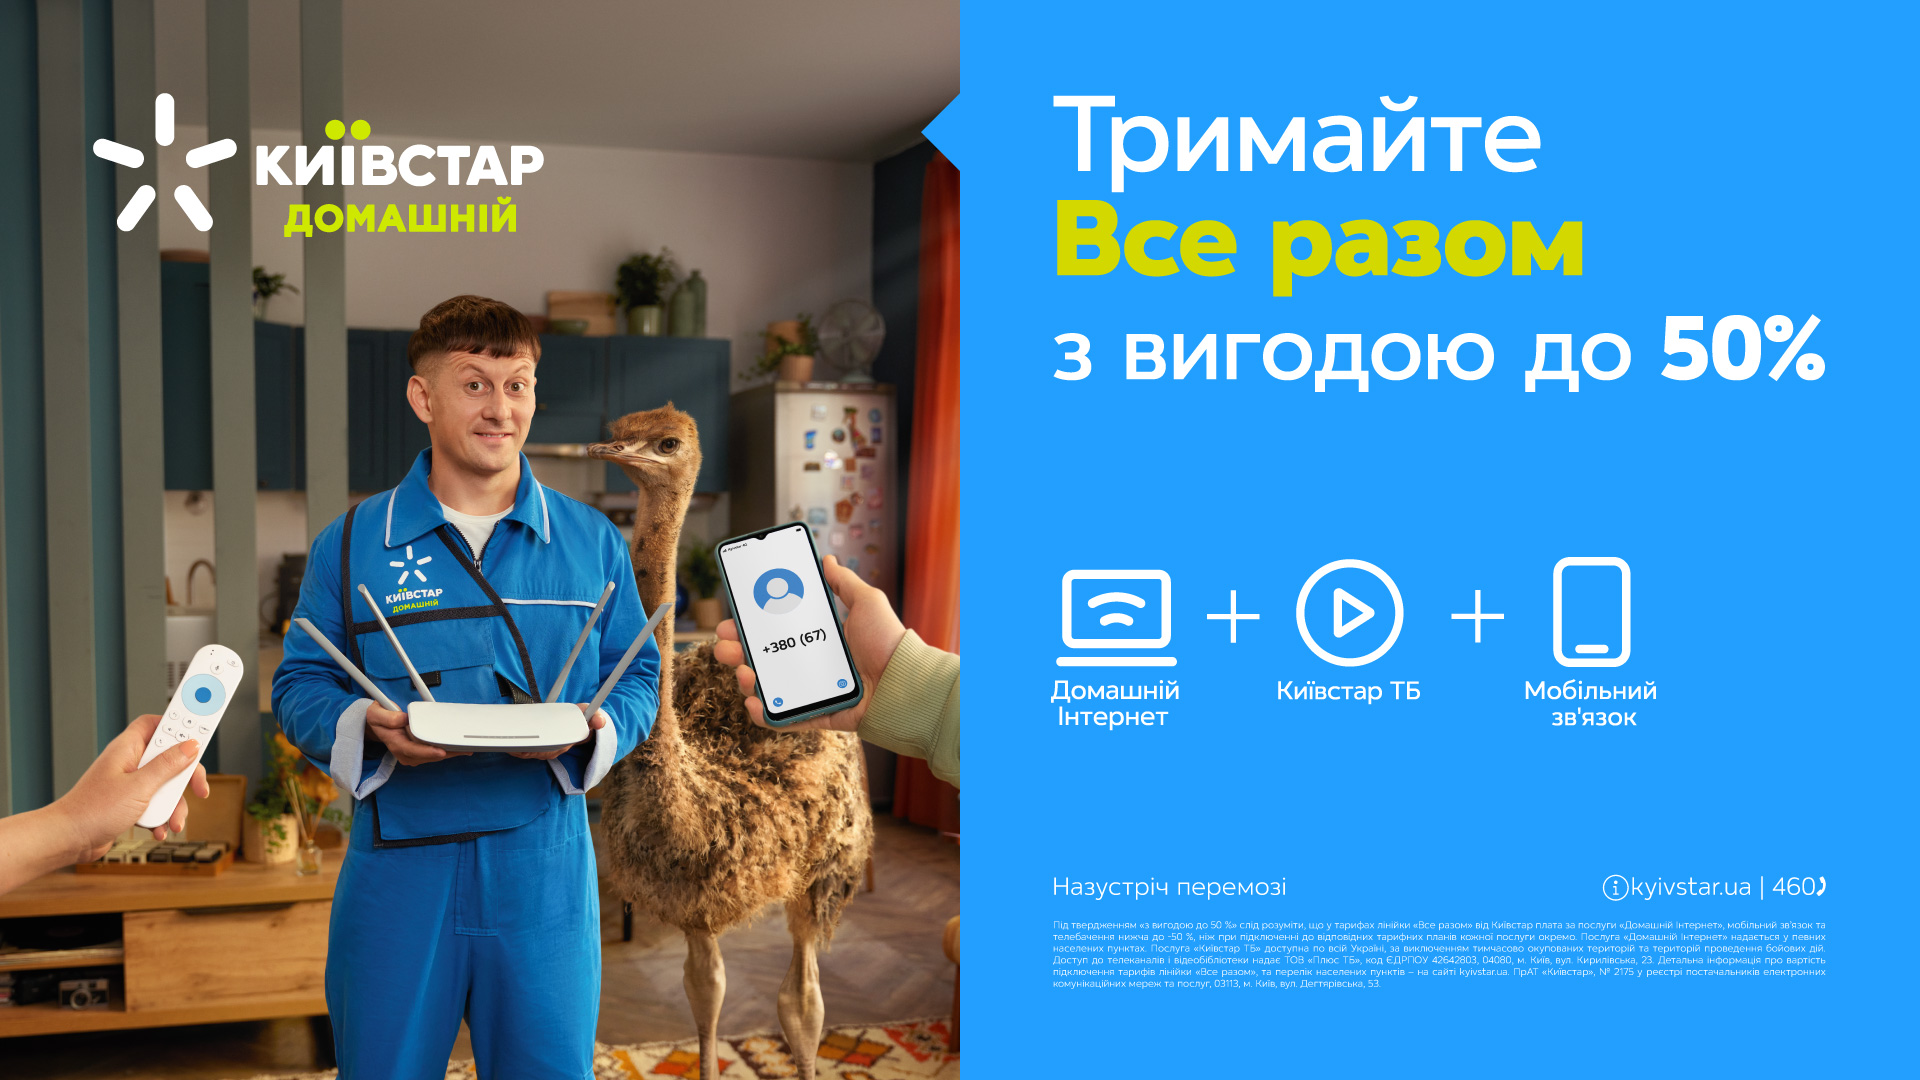 New Home Internet offers and the ALL TOGETHER line from Kyivstar